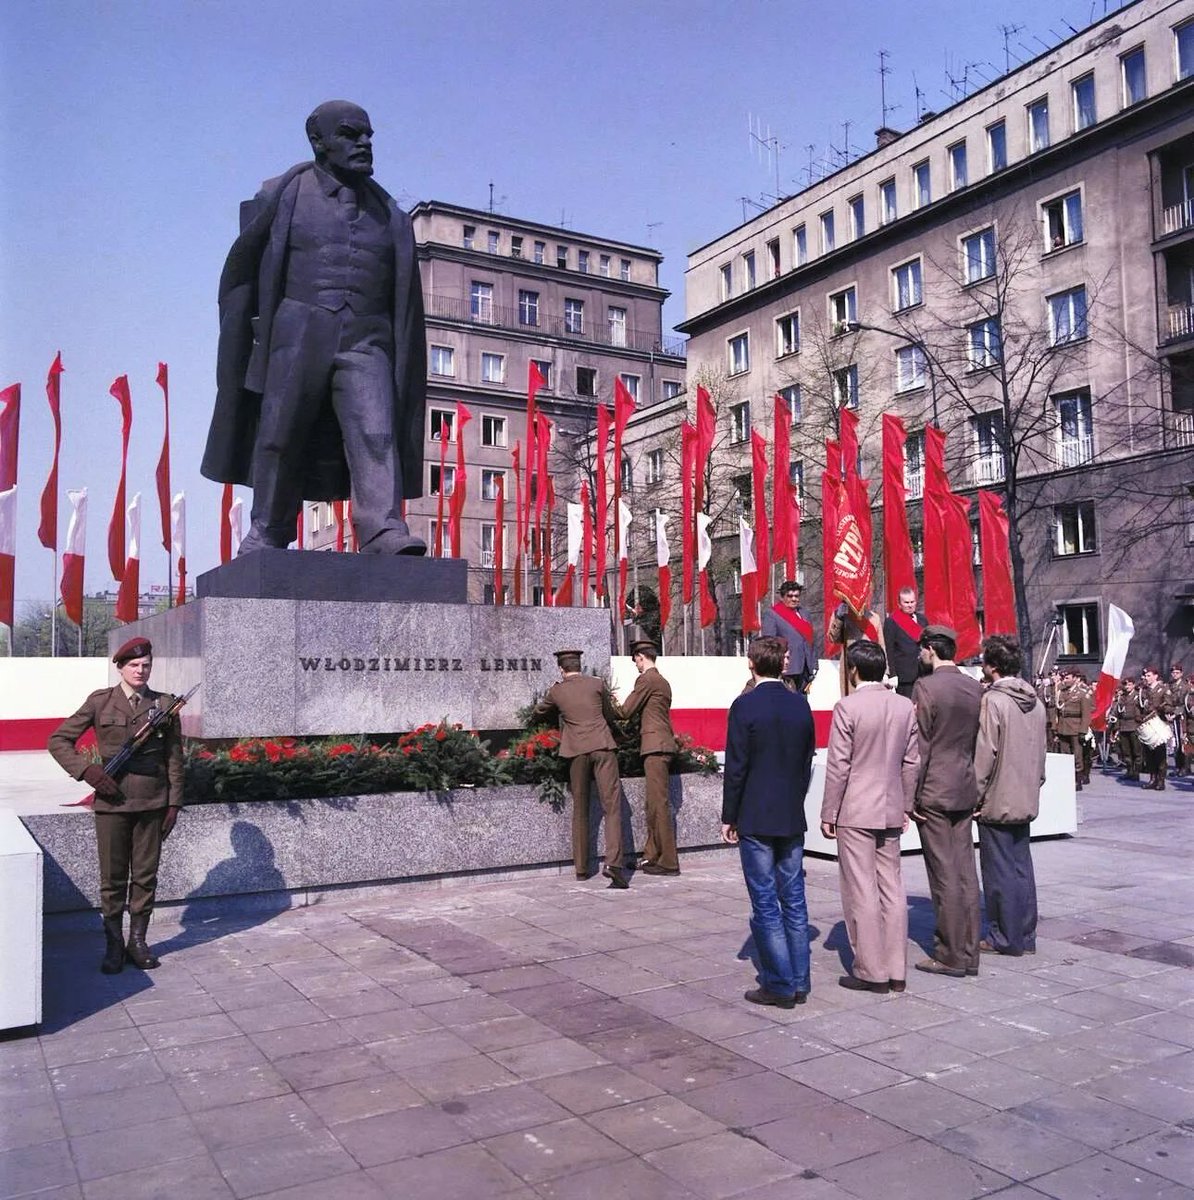 Delegations lay wreaths at the Lenin monument in Nowa Huta, Kraków, Poland, 1984